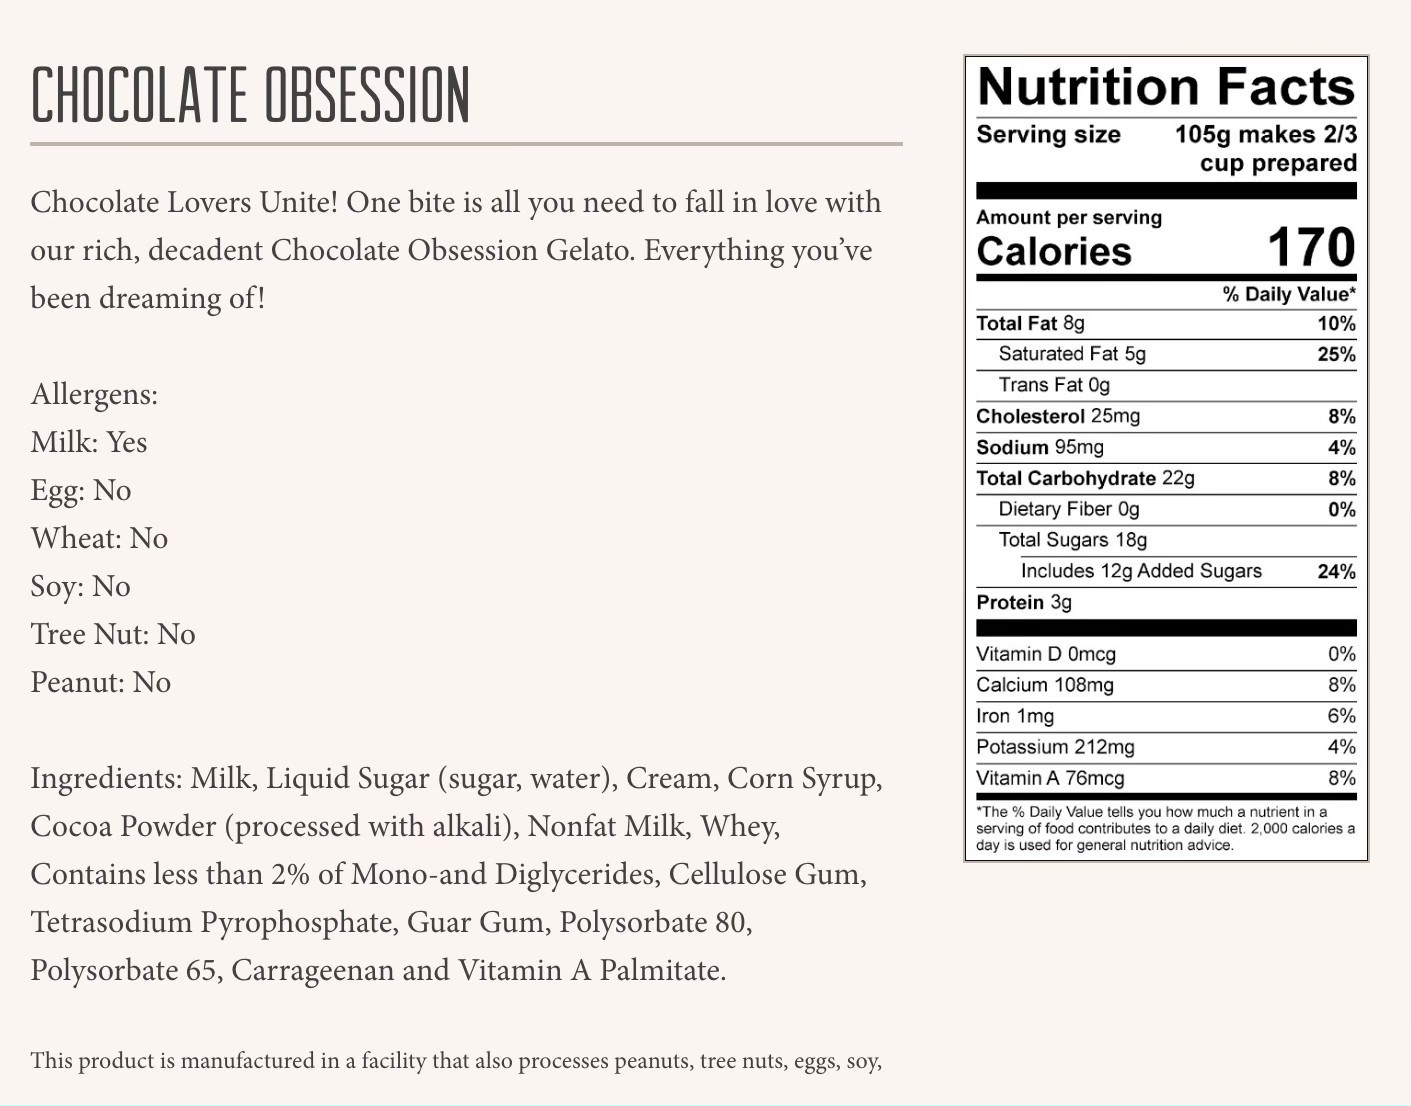 Chocolate Obsession Nutrition Facts